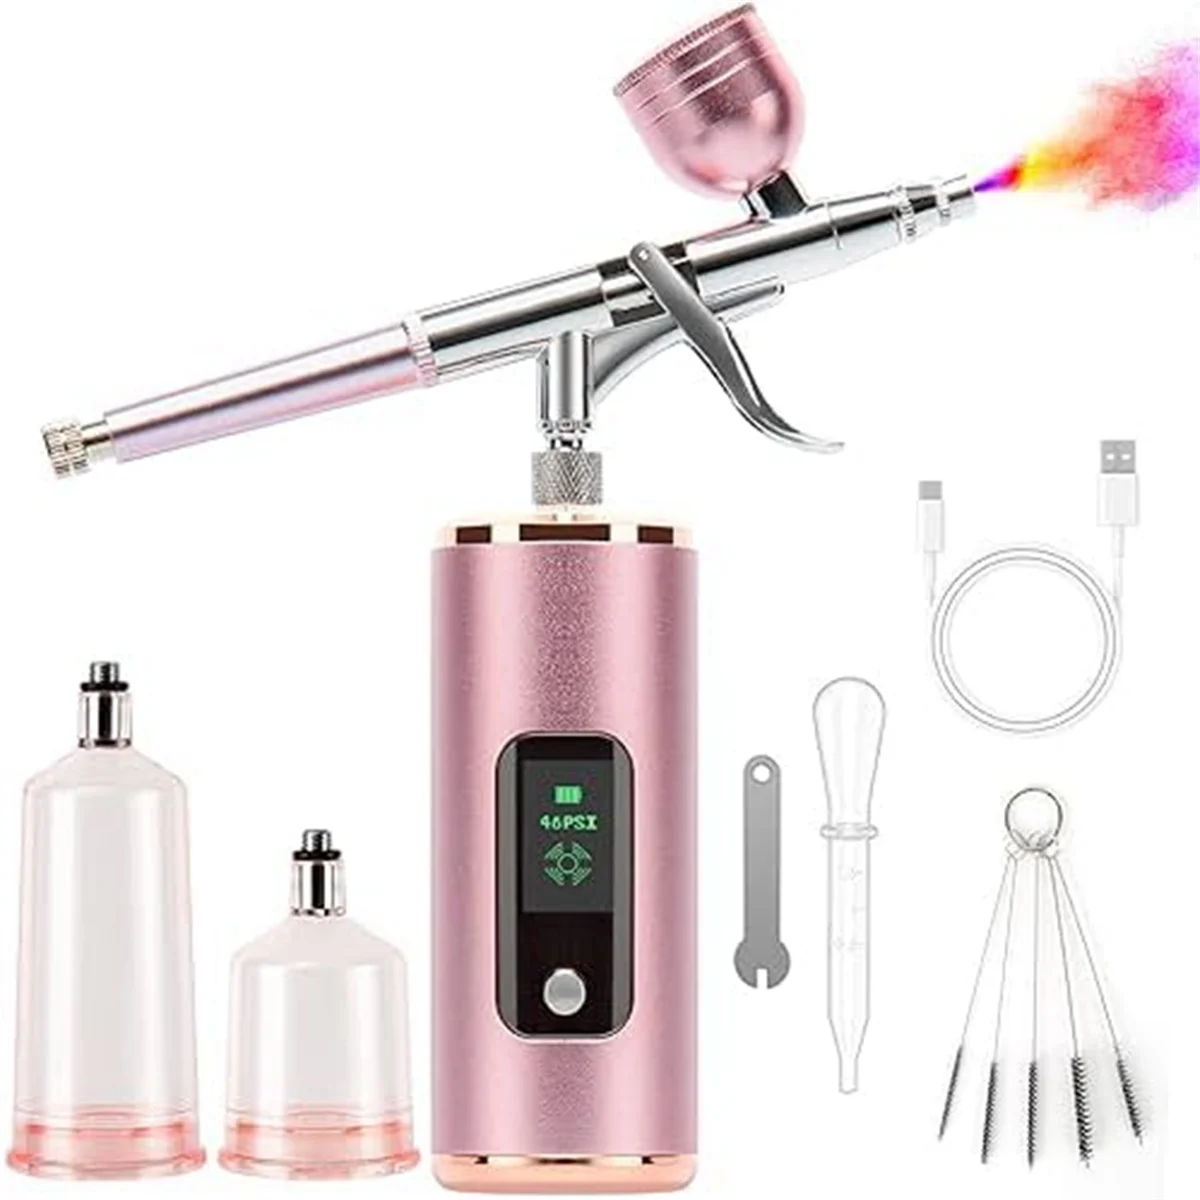 

46 PSI Airbrush Set with Compressor Suitable for Model Paint, Tattoo, Manicure, Cosmetics